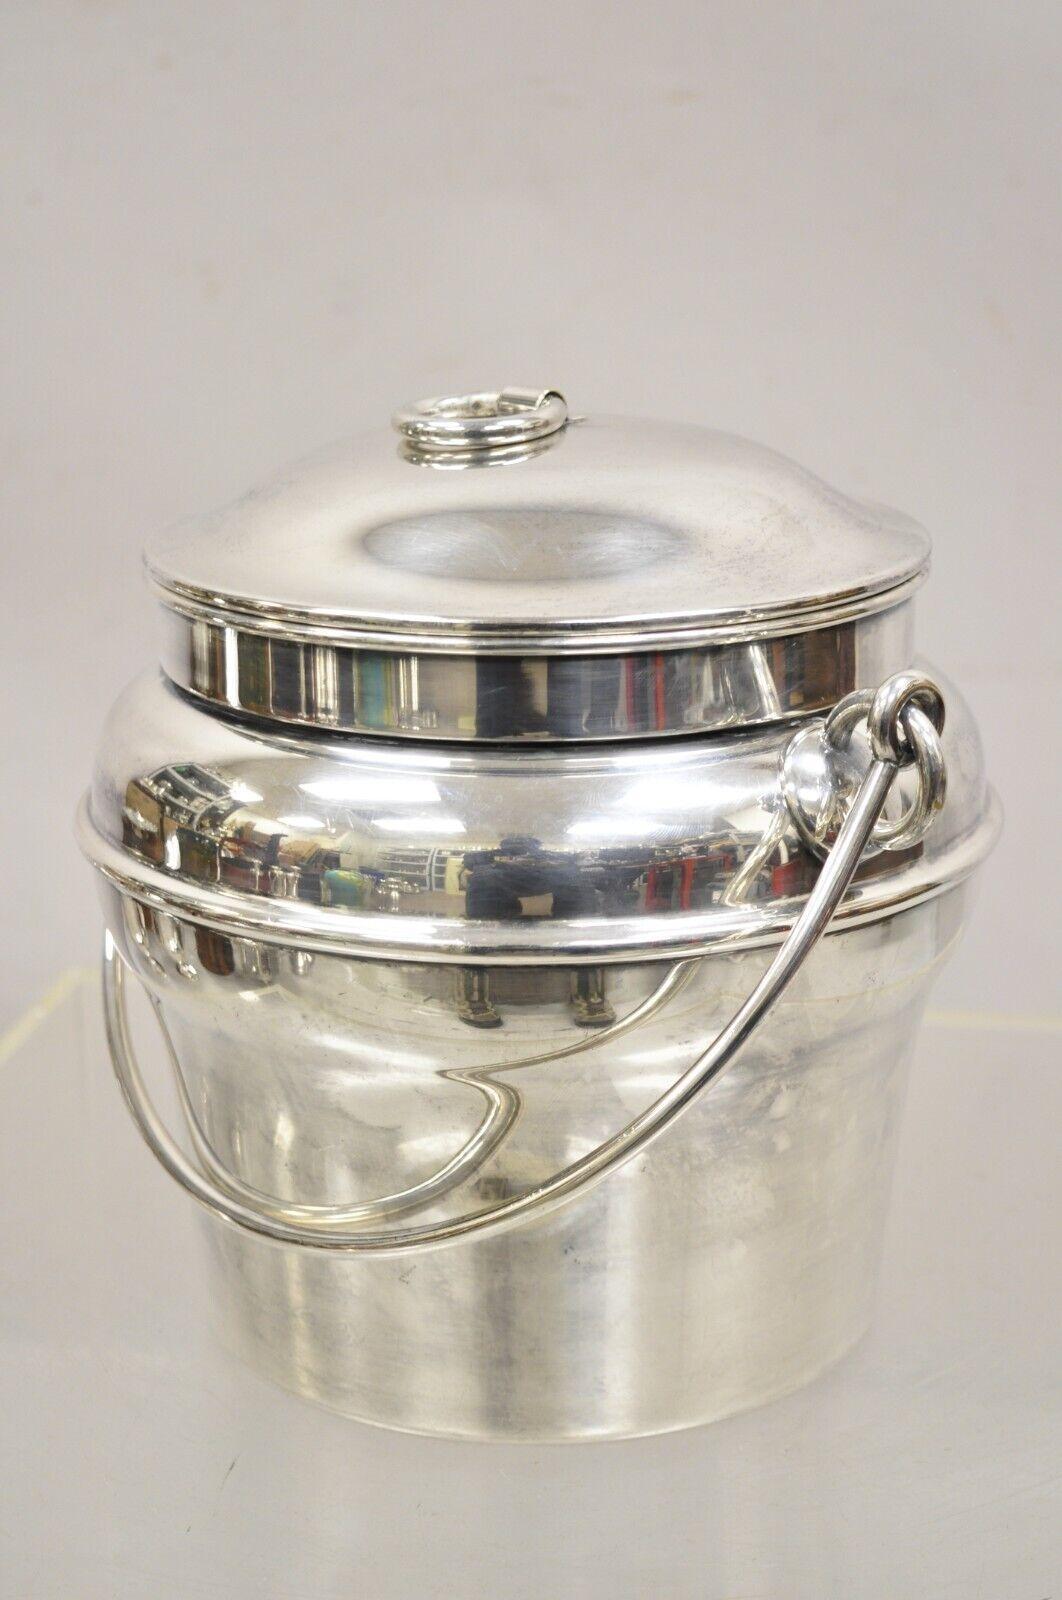 Vintage Fisher K308 Modern Silver Plated Lidded Ice Bucket with Glass Liner. Item features Swinging hinged handle, shapely form, glass lined interior, very nice vintage ice bucket. Circa Mid 20th Century. Measurements:  9